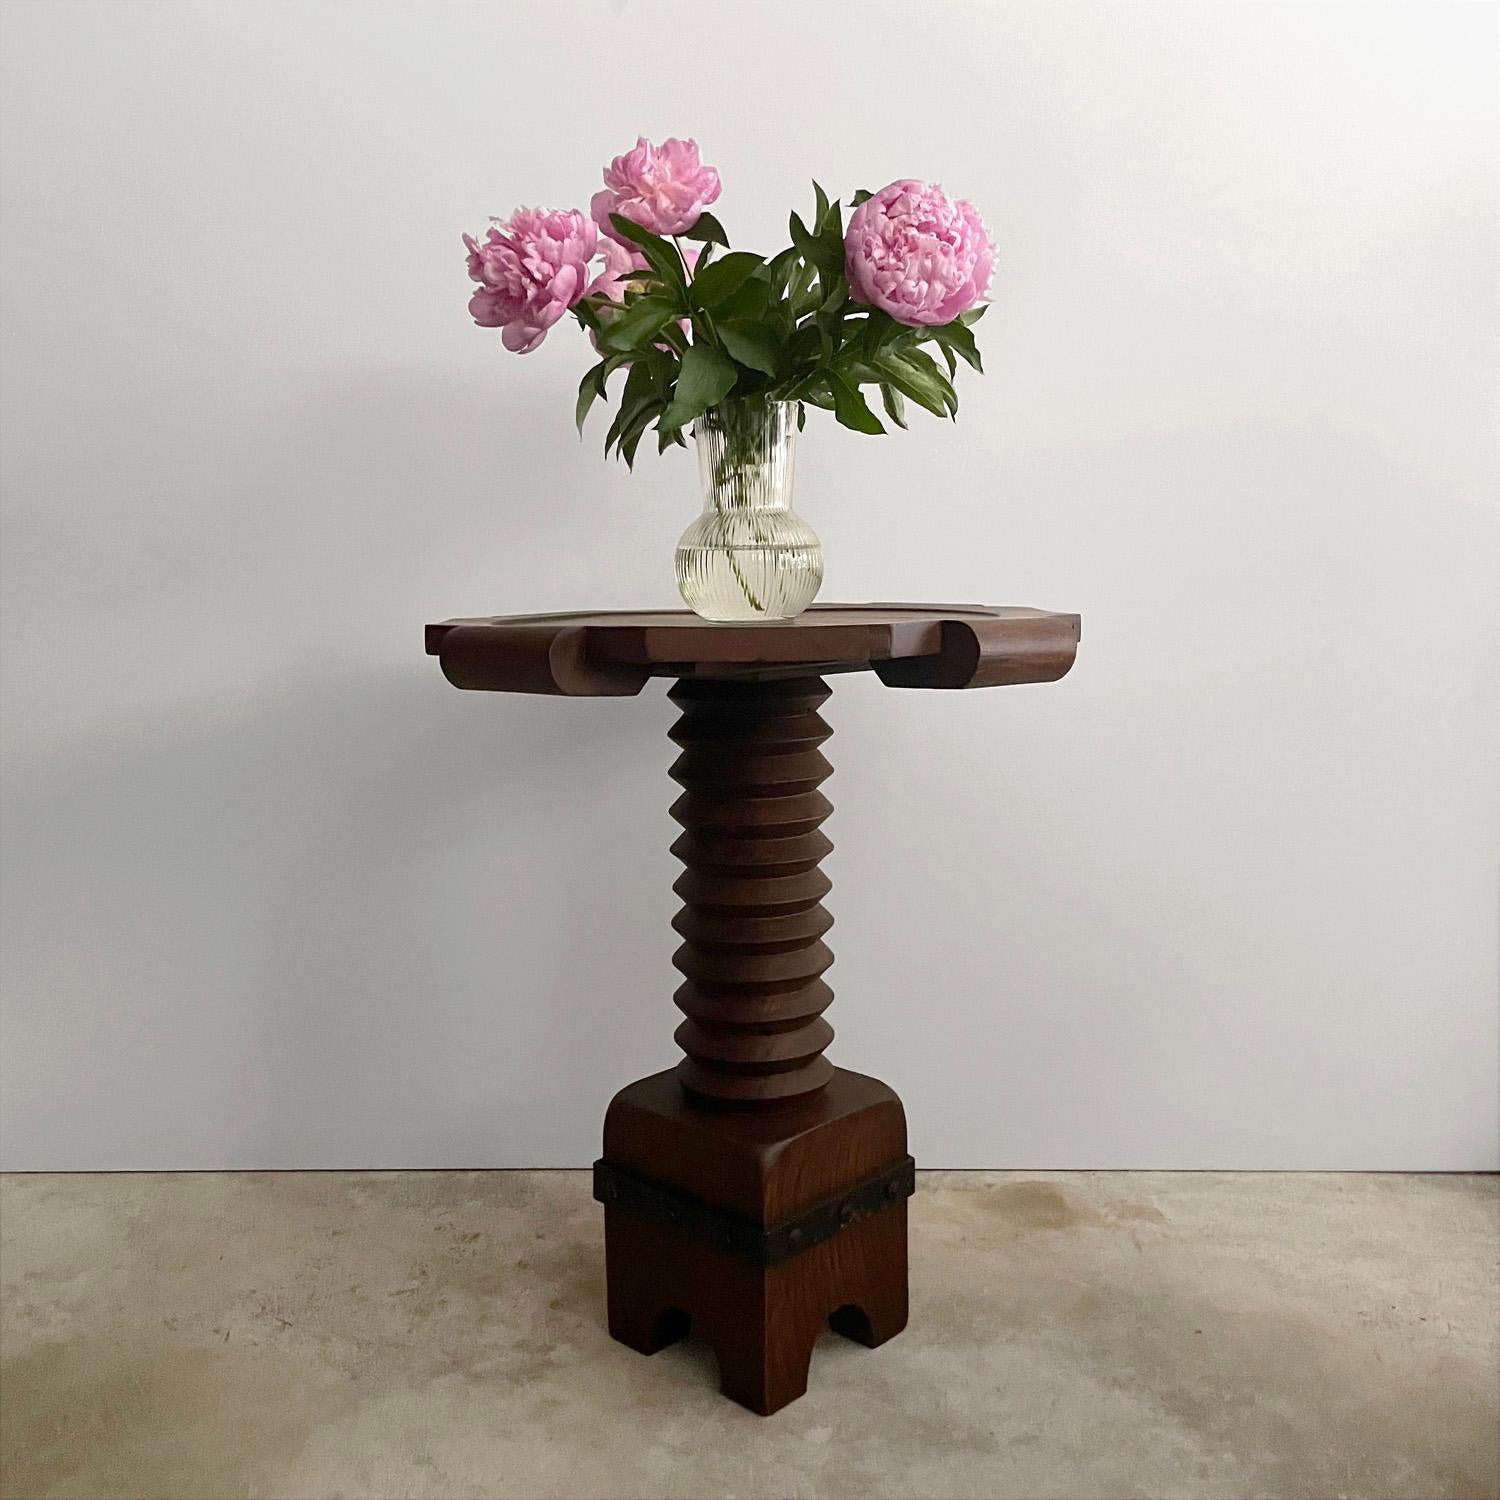 Charles Dudouyt walnut pedestal table
France, circa 1940s
This wonderful table is all about the details
Hand crafted artisanal piece
Octagonal tabletop with inlaid circular recess and rounded handles
Table surface is slightly irregular
Lovely wood